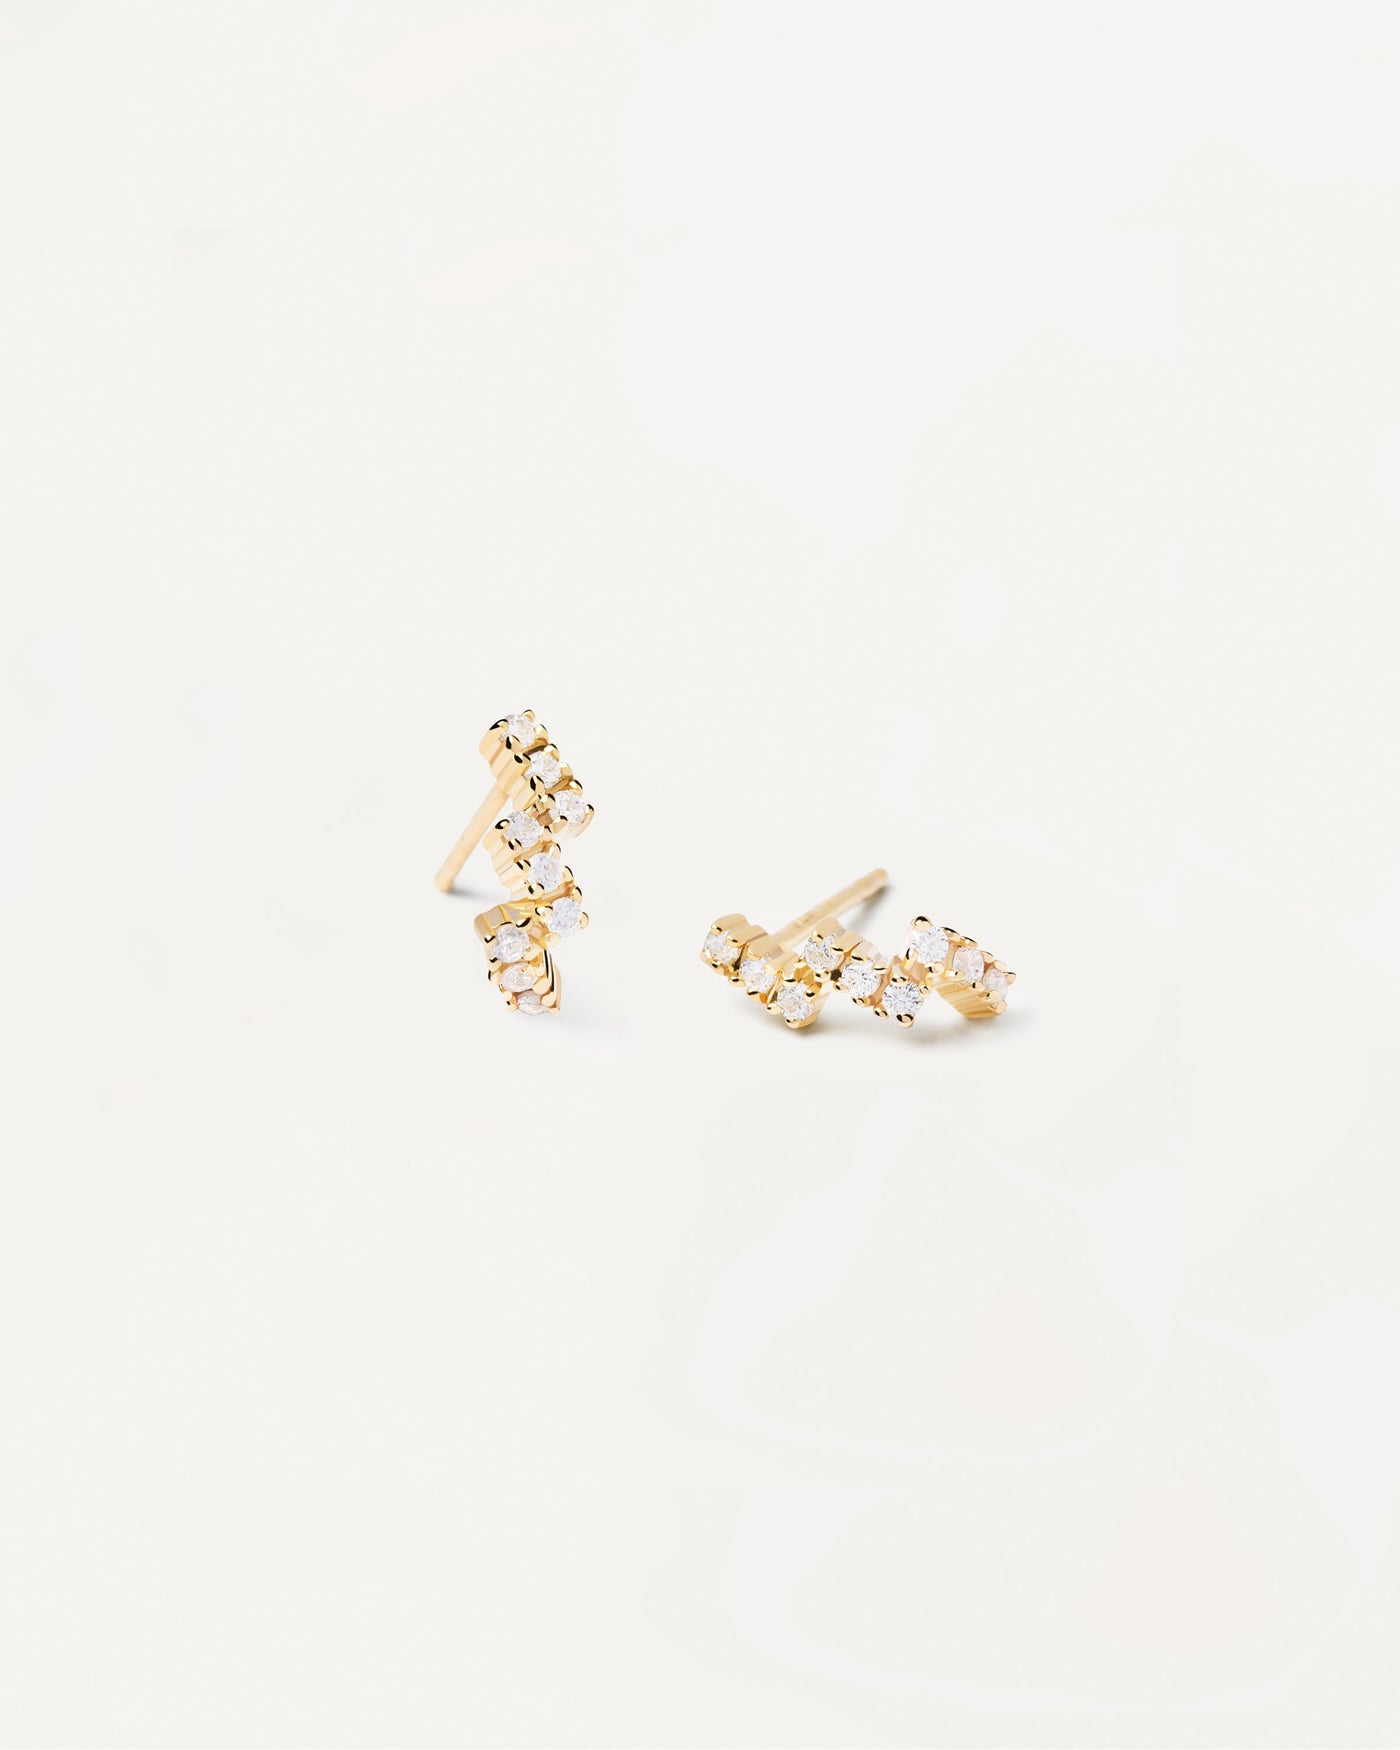 2023 Selection | The Zipper Earrings. Zigzag gold-plated earrings set with white zirconia. Get the latest arrival from PDPAOLA. Place your order safely and get this Best Seller. Free Shipping.